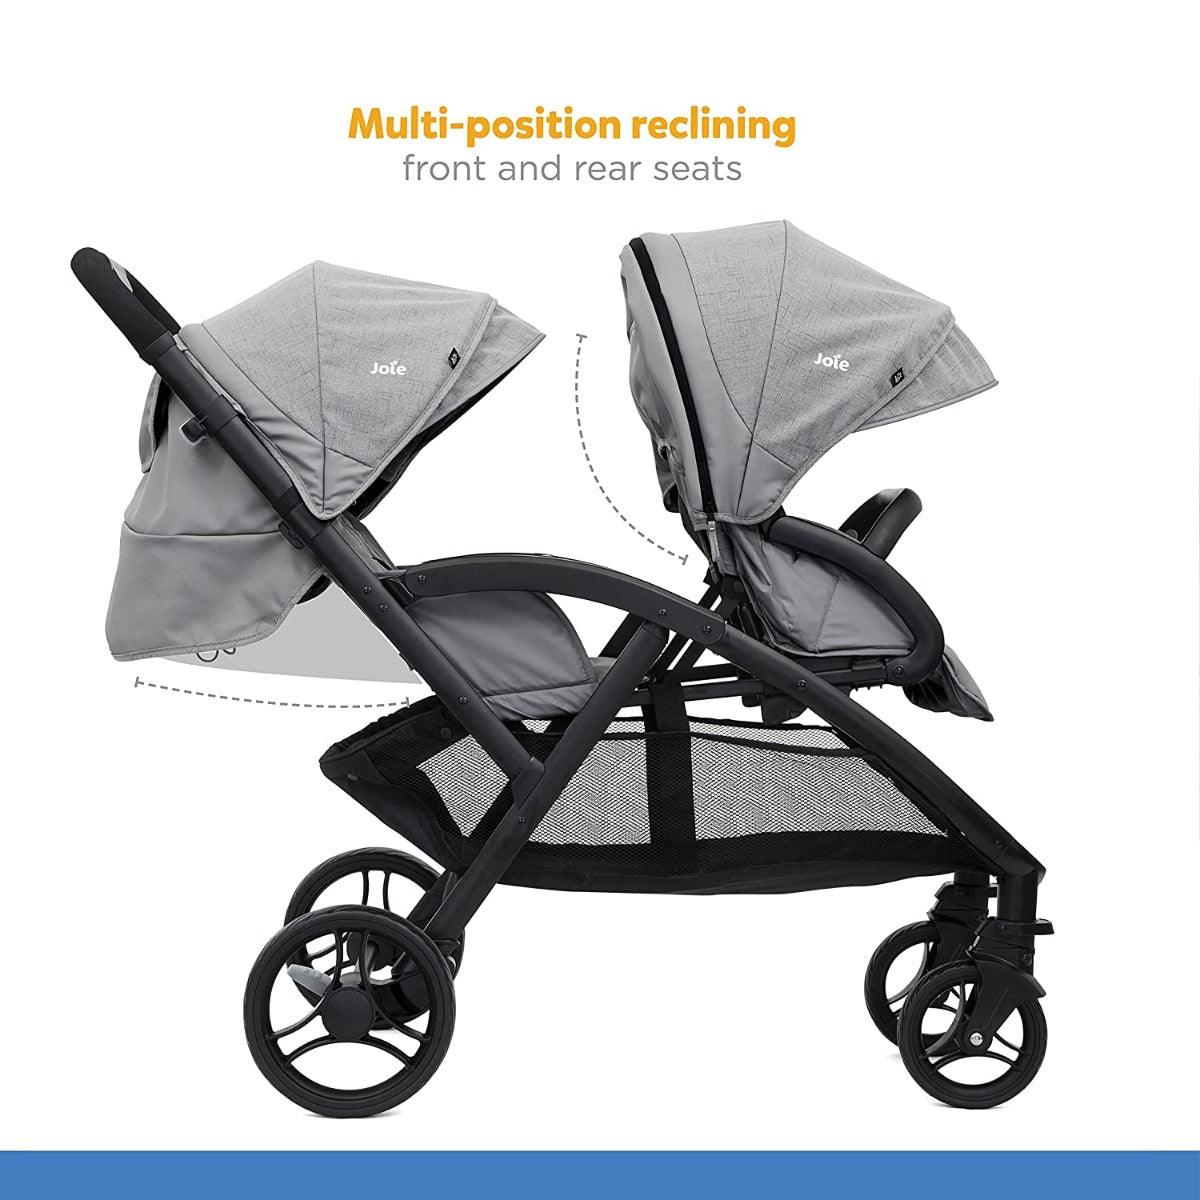 Joie Evalite Duo Baby Stroller - Double Baby Pram with Single Touch Brake for Ages 0-3 Years